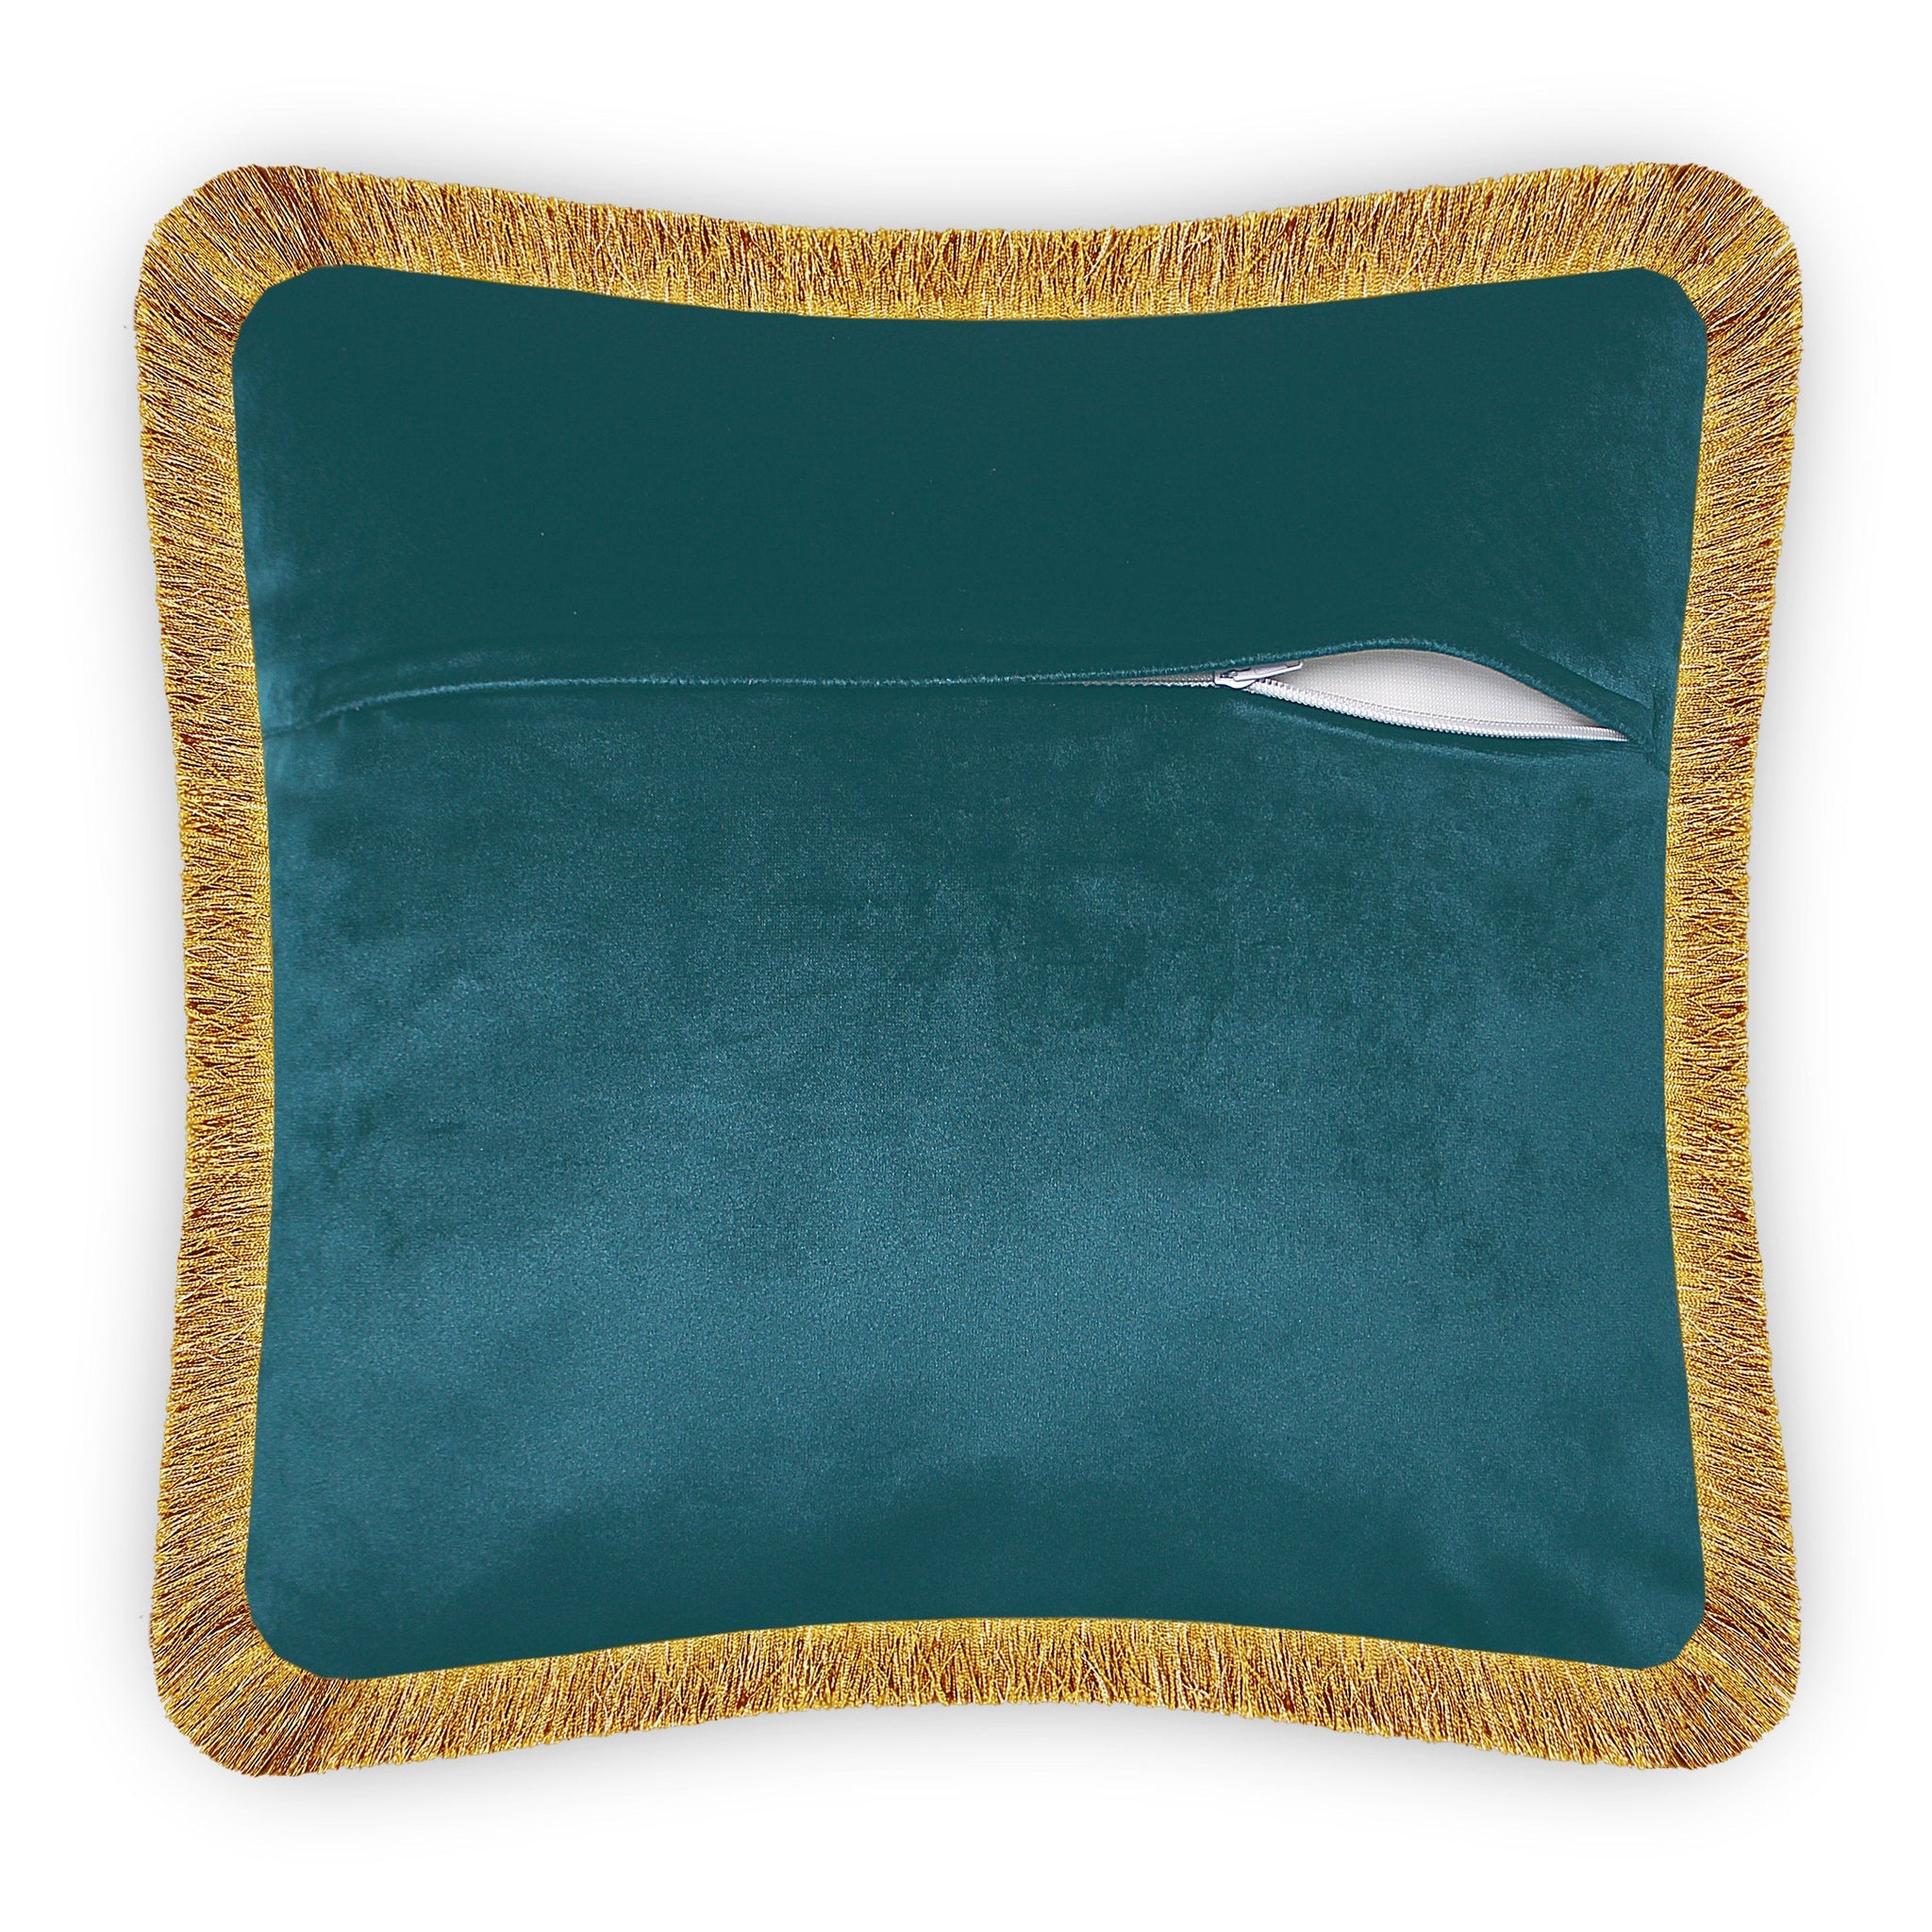  Cushion Cover Velvet Decorative Pillow Cover Home Decor Horse Embroidery Throw Pillow for Sofa Chair Bedroom Living Room Teal 45x45 cm (18x18 Inches).